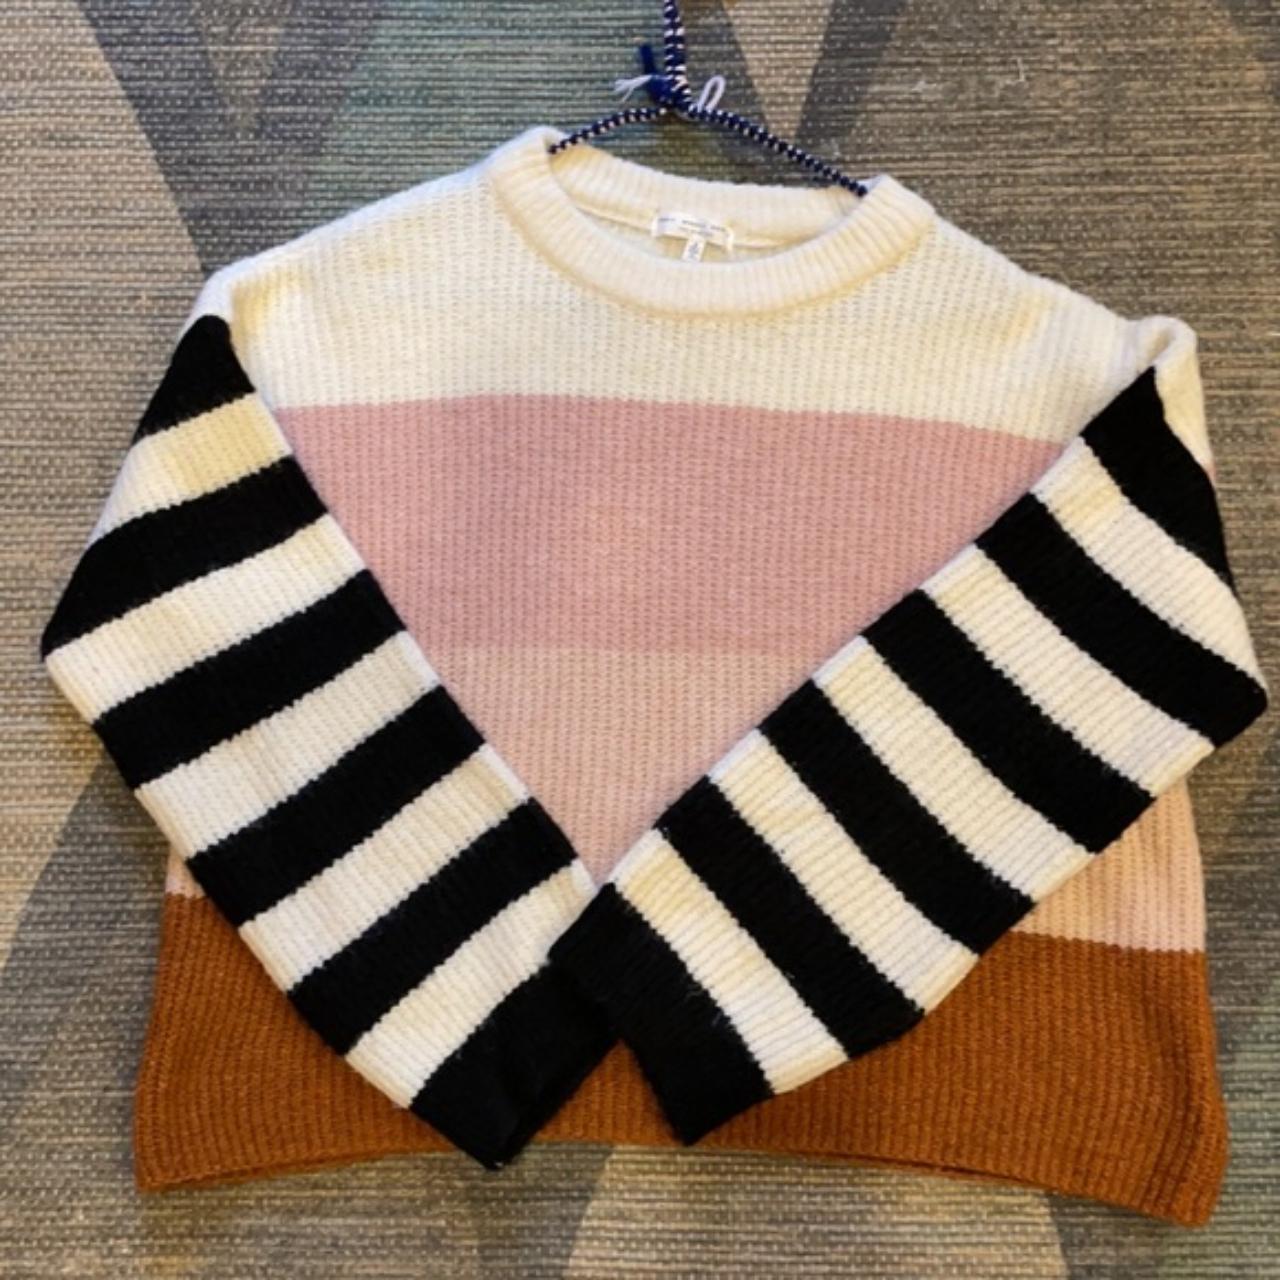 Urban Outfitters Truly Madly Deeply Striped